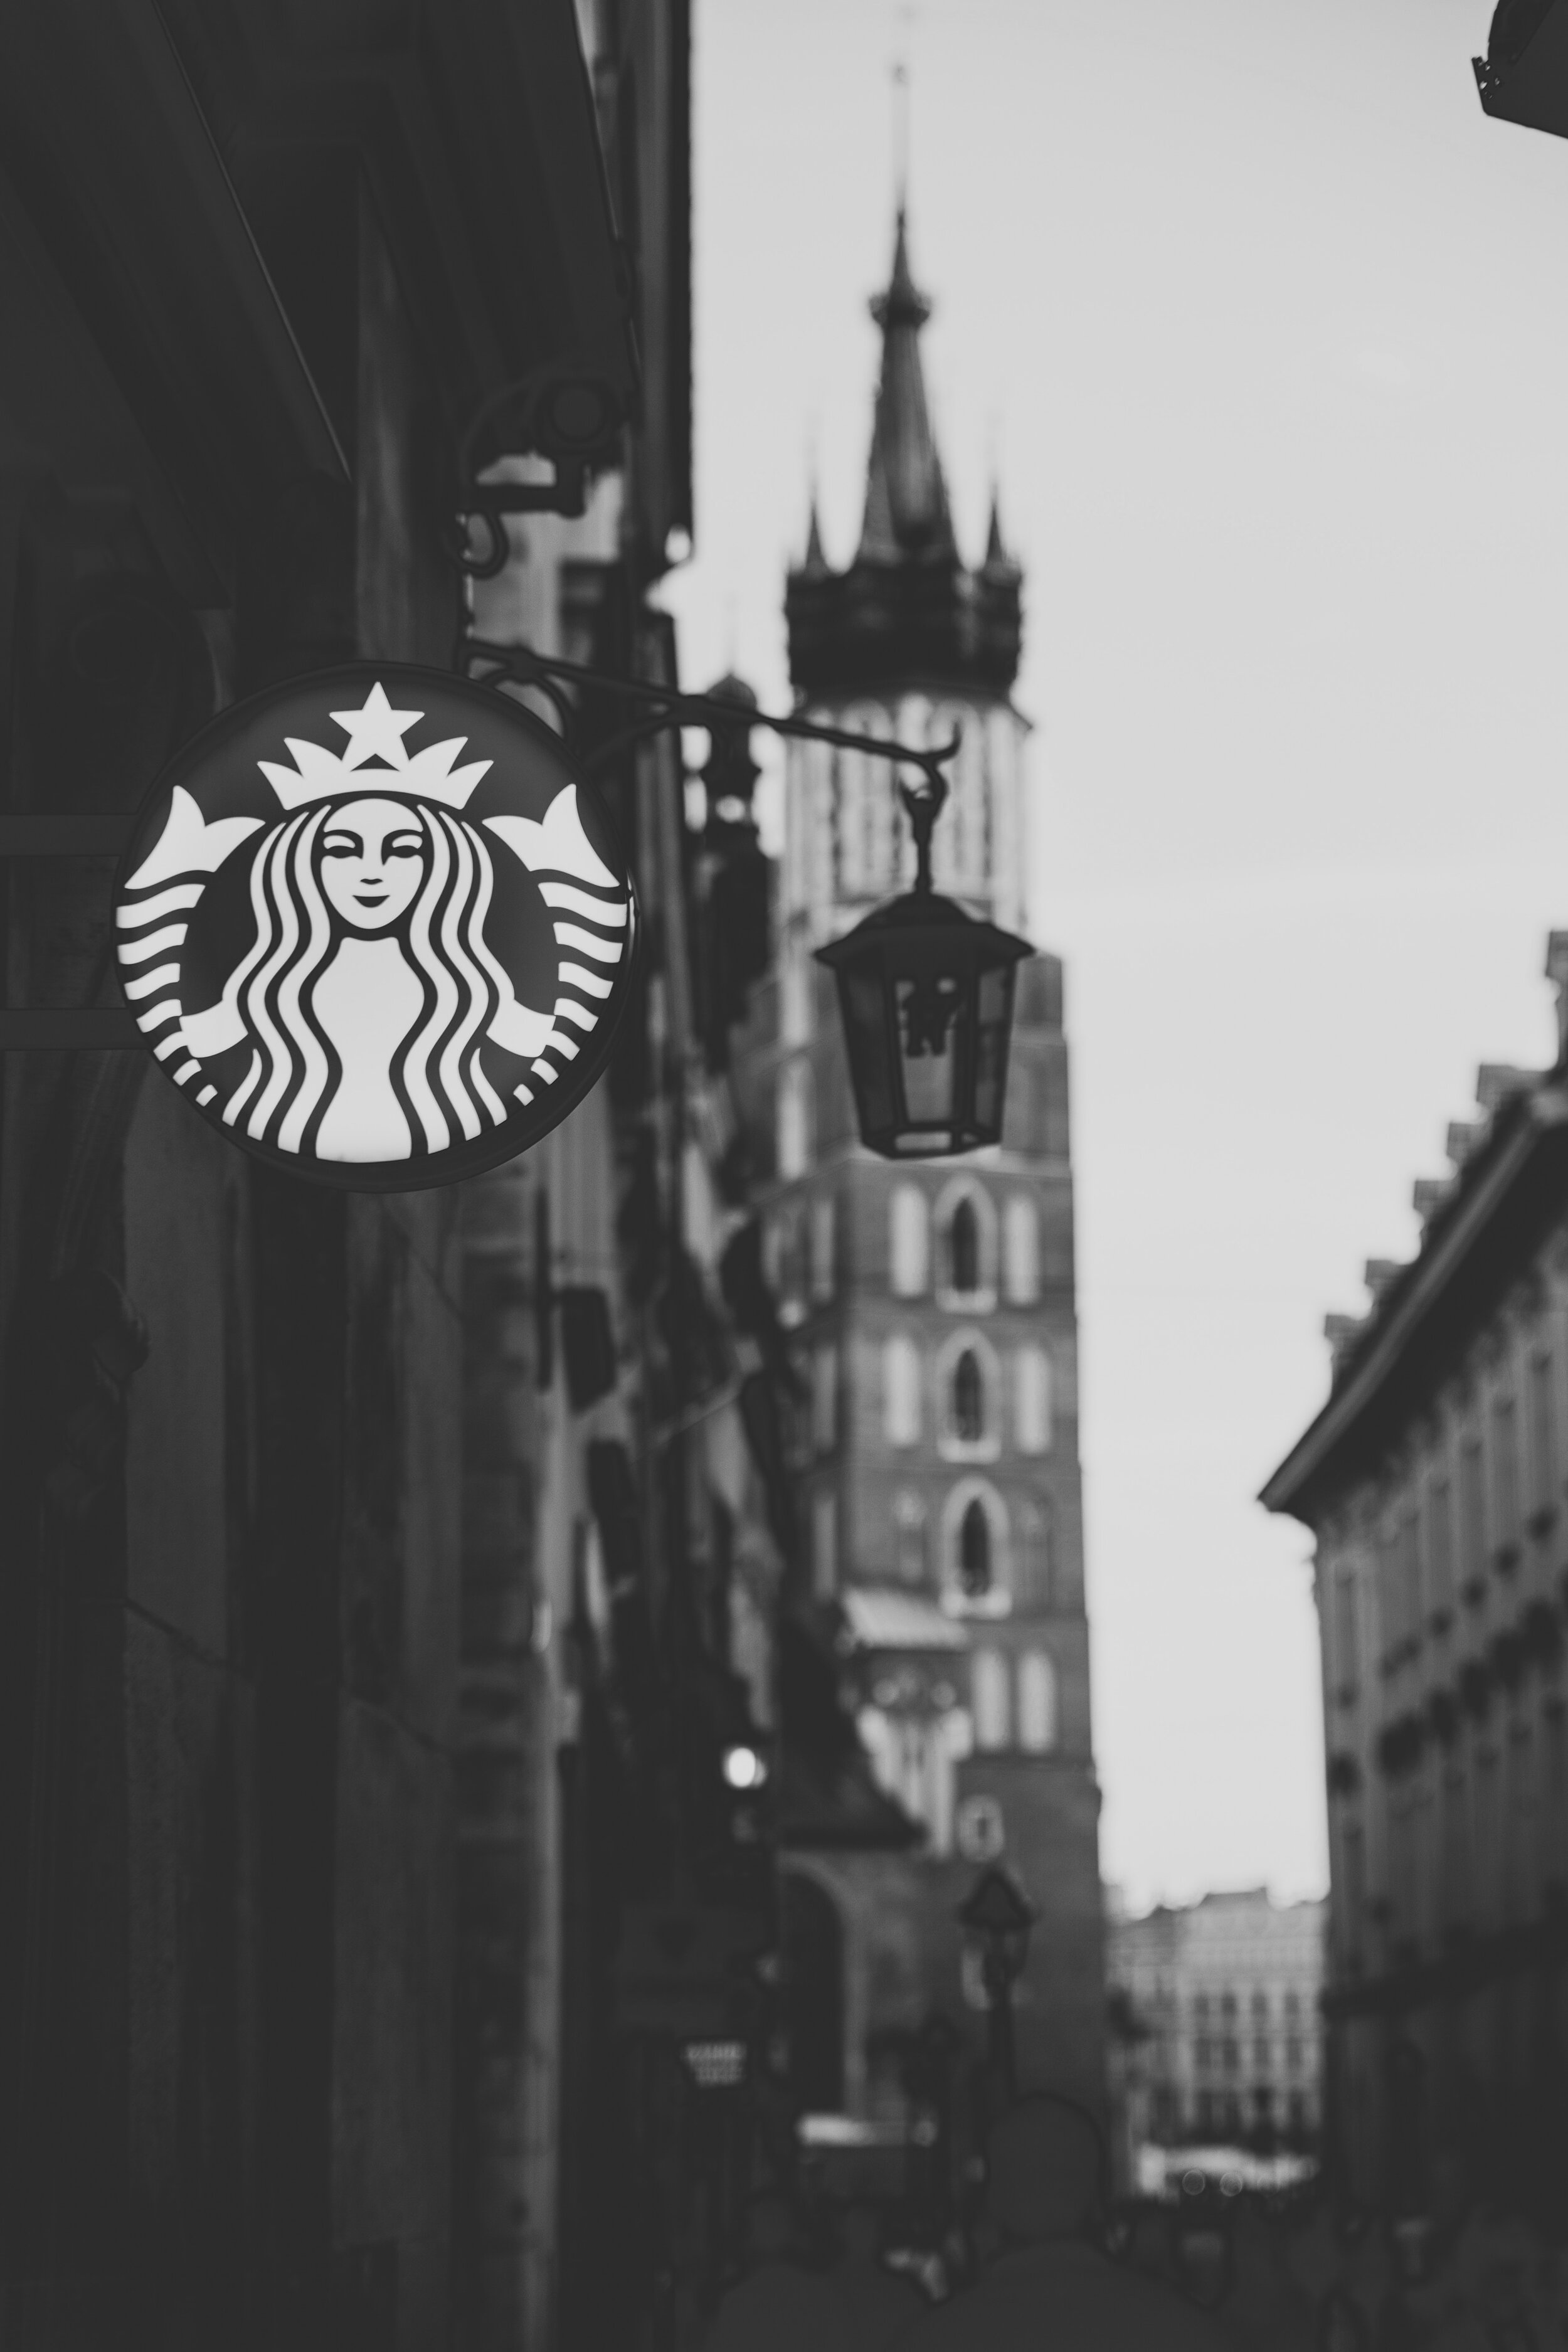 A Starbucks sign hangs from a shop front with a street scene behind